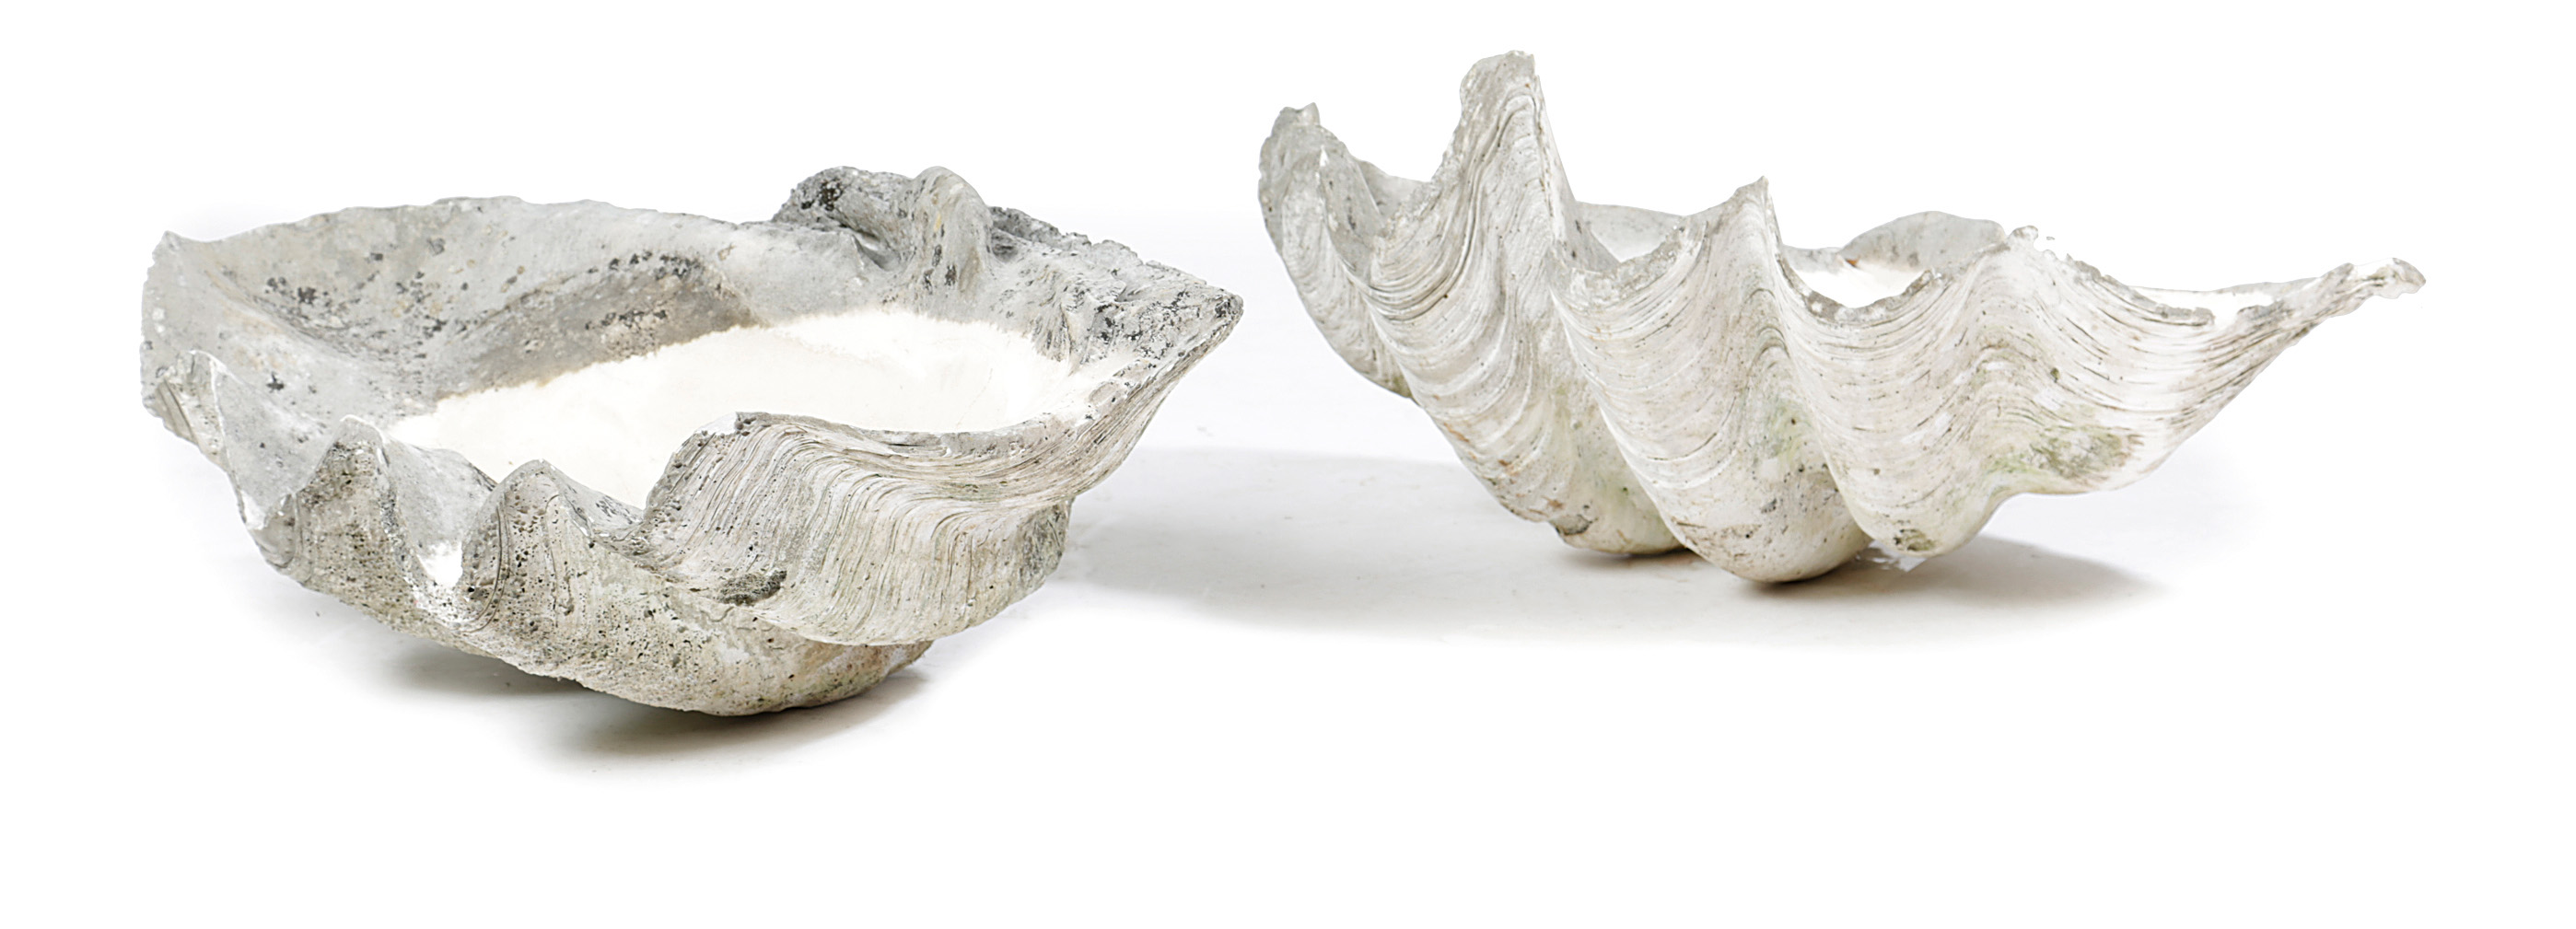 A LARGE PAIR OF GIANT CLAM SHELLS (TRICADNA GIGAS), PROBABLY 19TH CENTURY with a weathered finish (